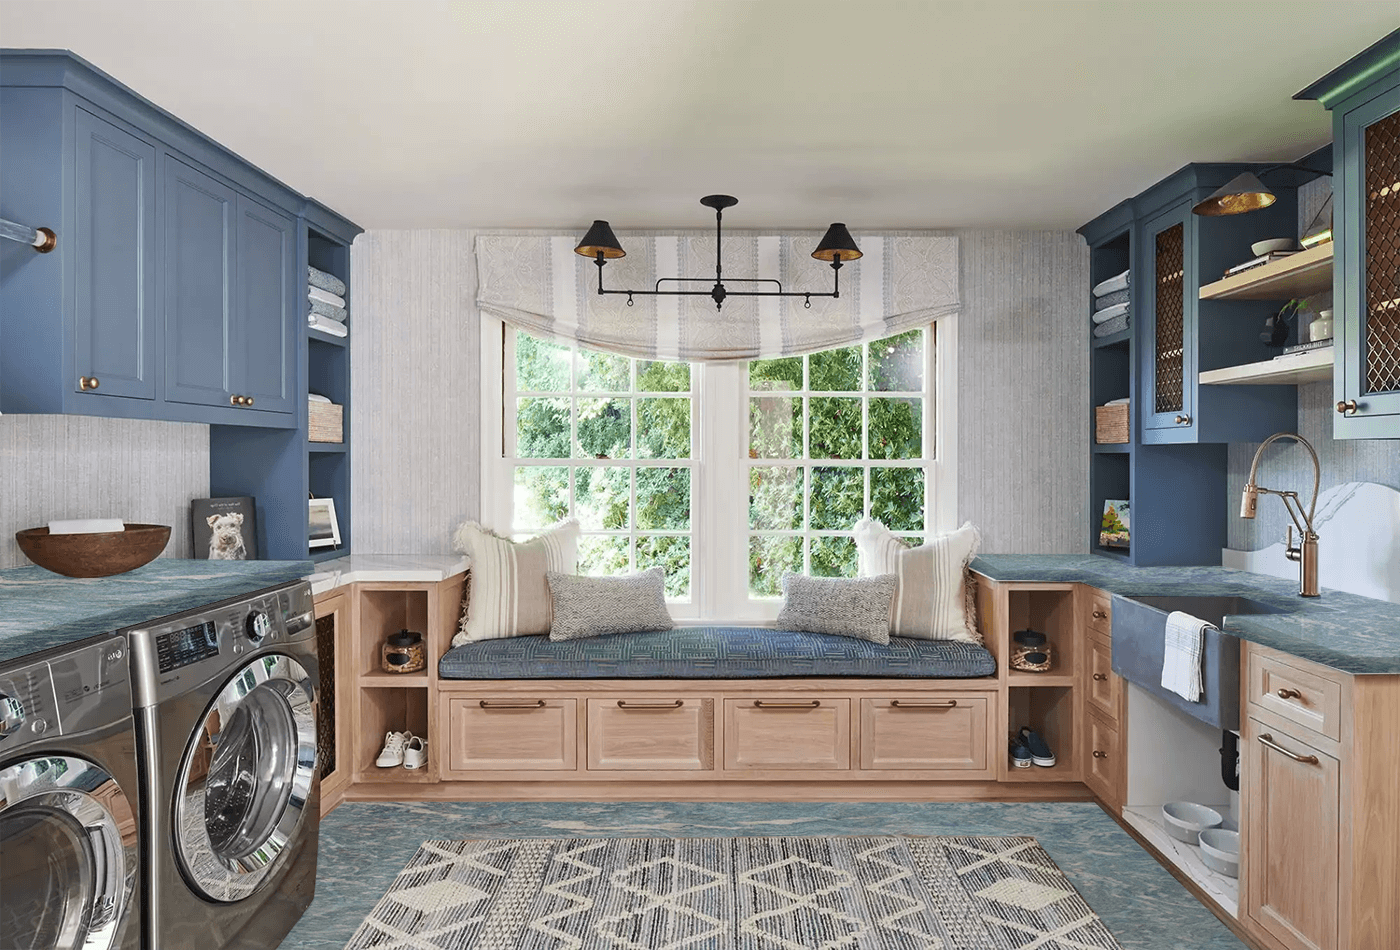 Blue Mudroom Ideas that You Want to Ship